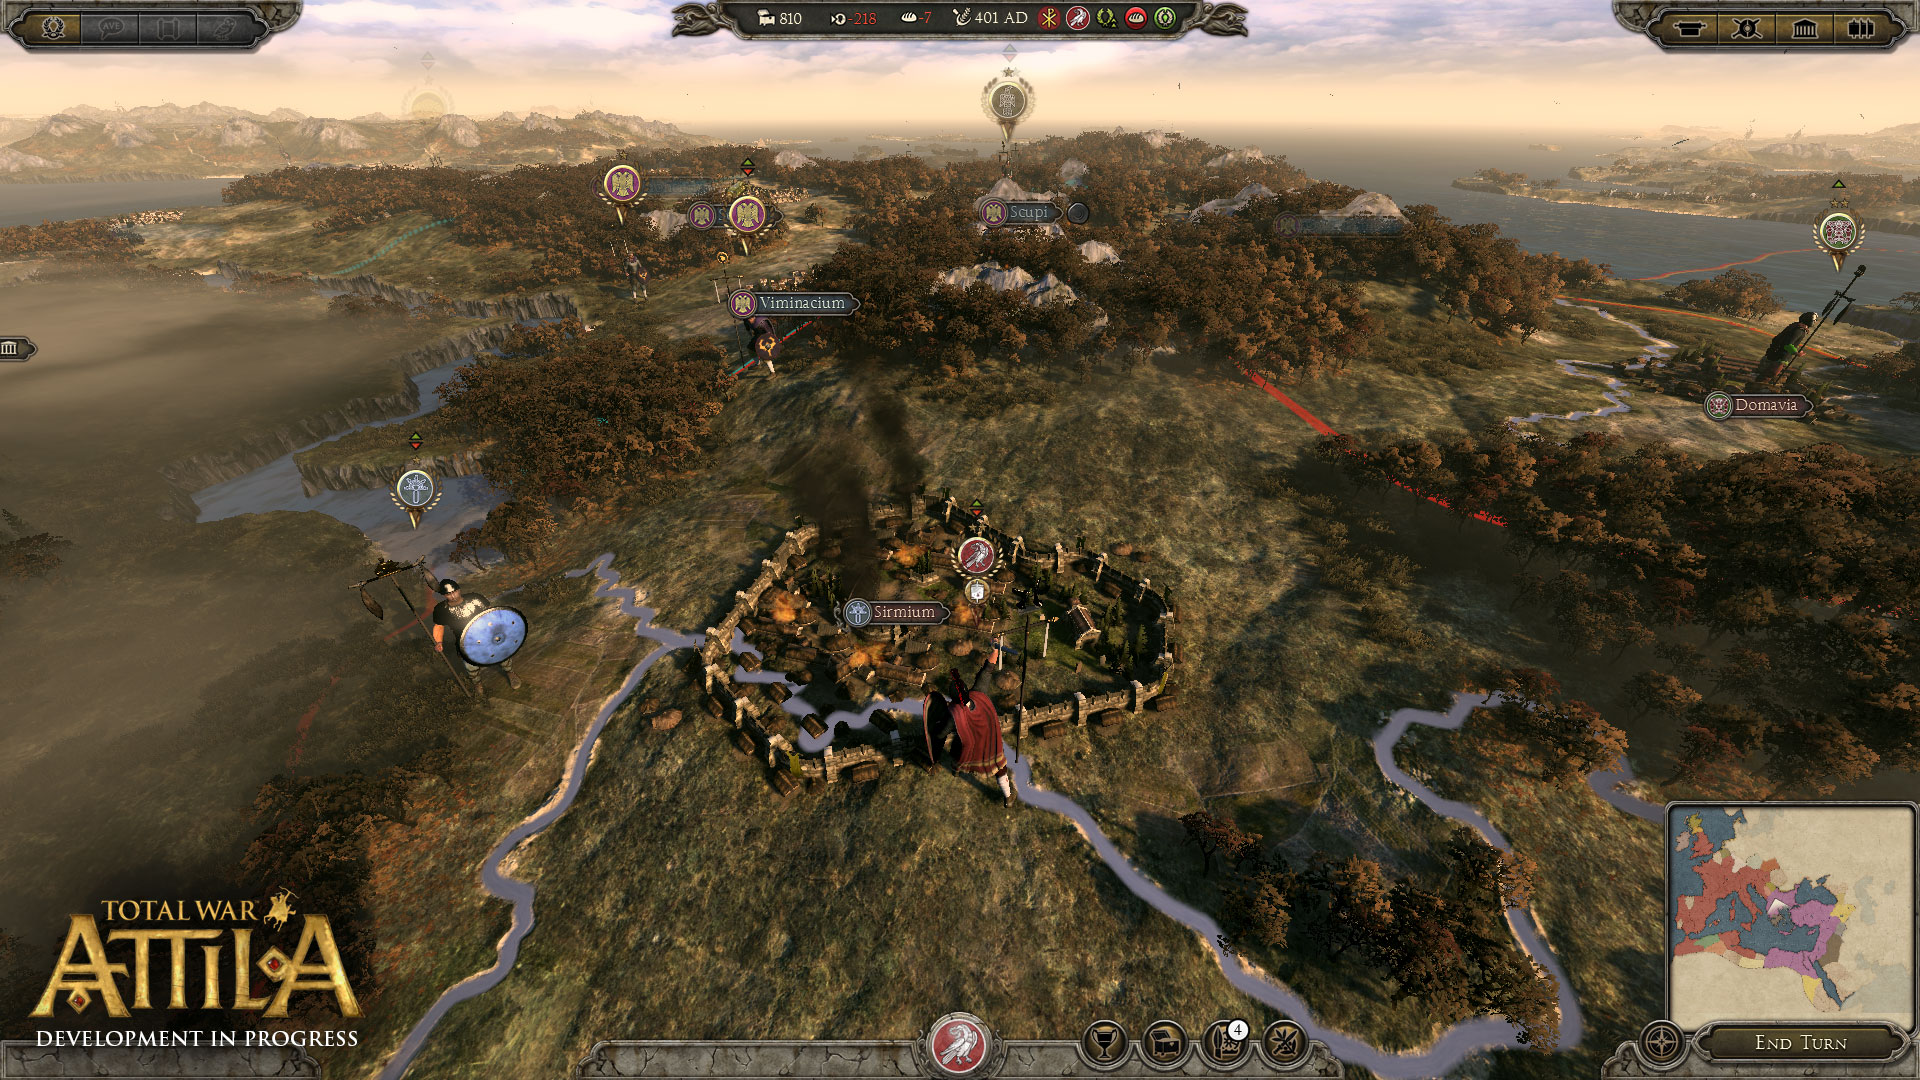 There’s A New Total War Game Coming, But Hrm